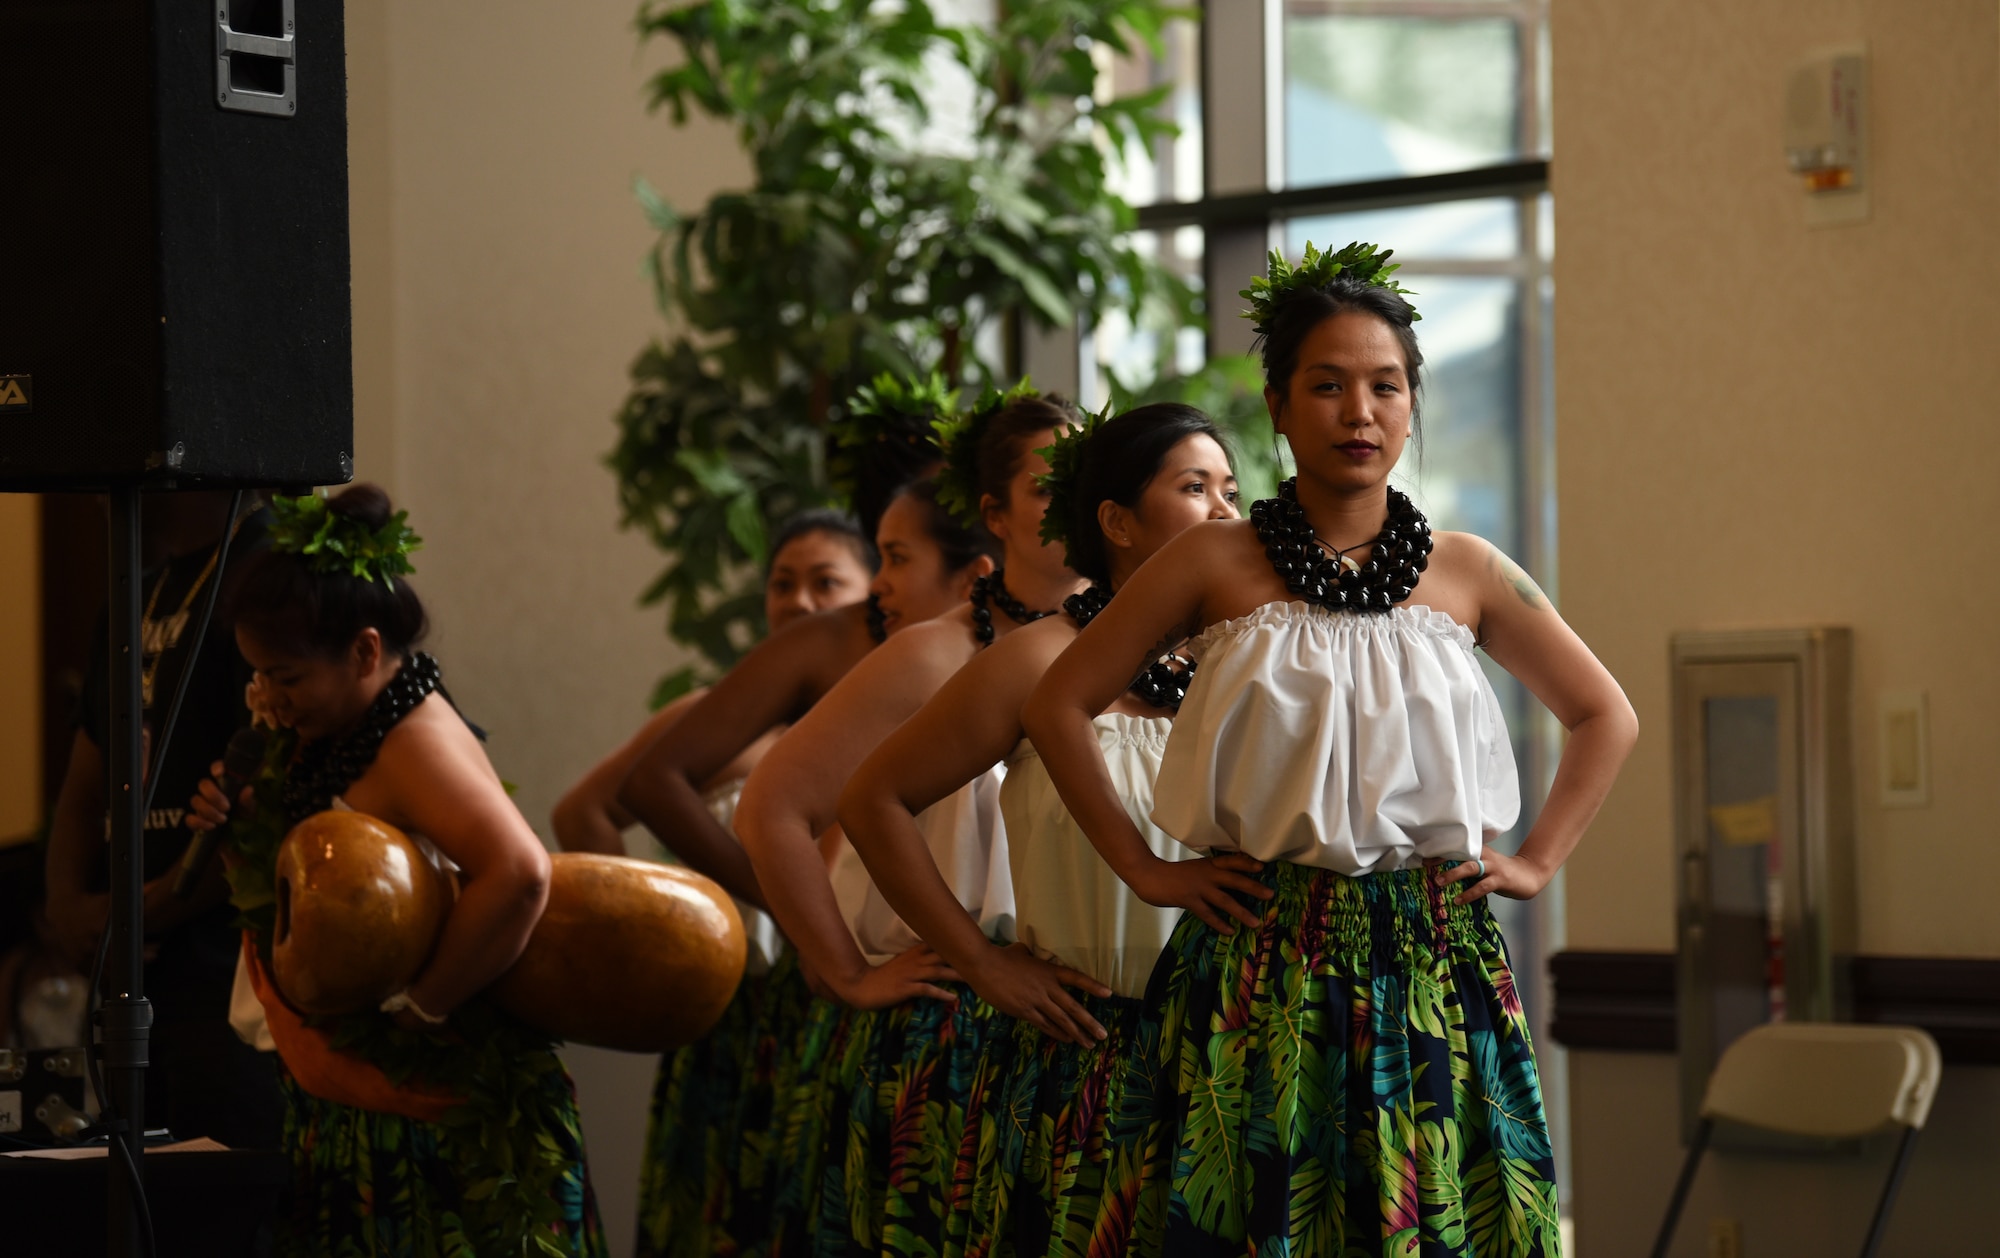 Members of the 808 Ohana of the Midwest dance group, led by Senior Airman Tiffany Ellison, 436th Supply Chain Operations Squadron, prepare to take the stage for a Hula performance on May 3, 2019, at Scott Air Force Base, Ill. The performance was a part of the Scott AFB Wingman Day Diversity Festival. (U.S. Air Force photo by Airman 1st Class Solomon Cook)